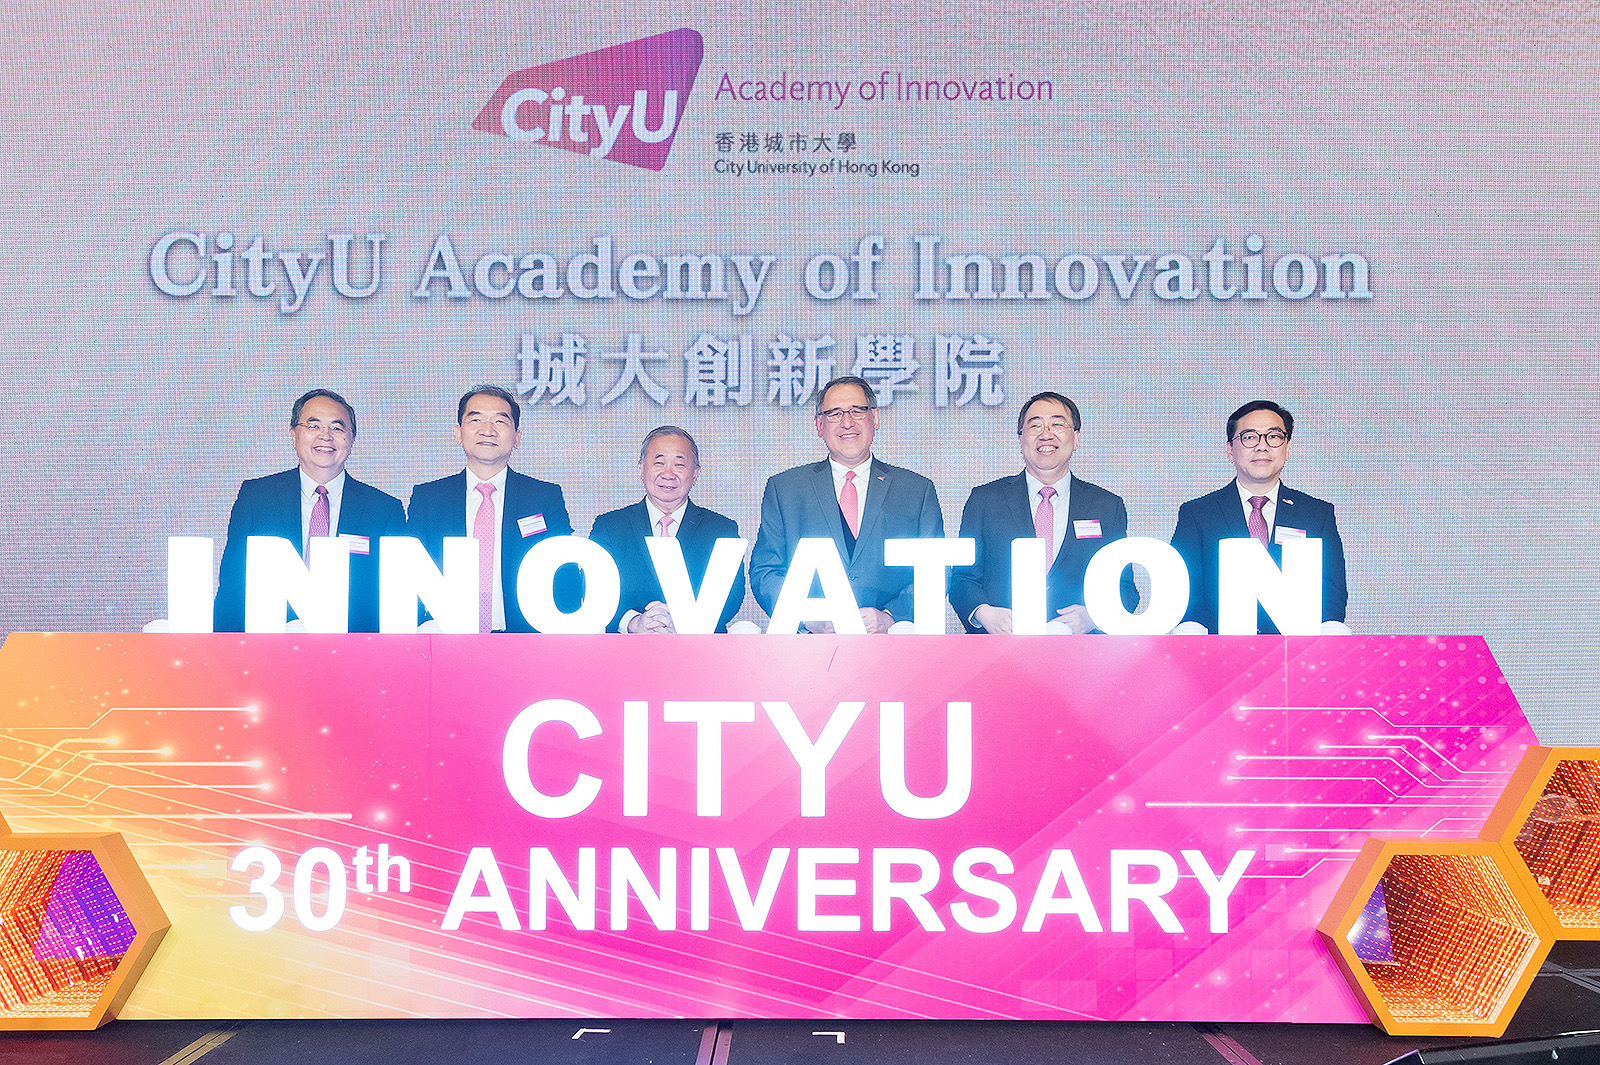 (From left) Professor Yue Chee Yoon, Dean of Graduate Studies, Professor Michael Yang Mengsu, Senior Vice-President (Innovation and Enterprise), Professor Freddy Boey, Mr Lester Garson Huang, Professor Lee Chun-sing, Provost and Deputy President and Professor Michael Tse Chi-Kong, Associate Vice-President (Innovation) and Director of CAI celebrated the establishment of CAI with honourable guests.